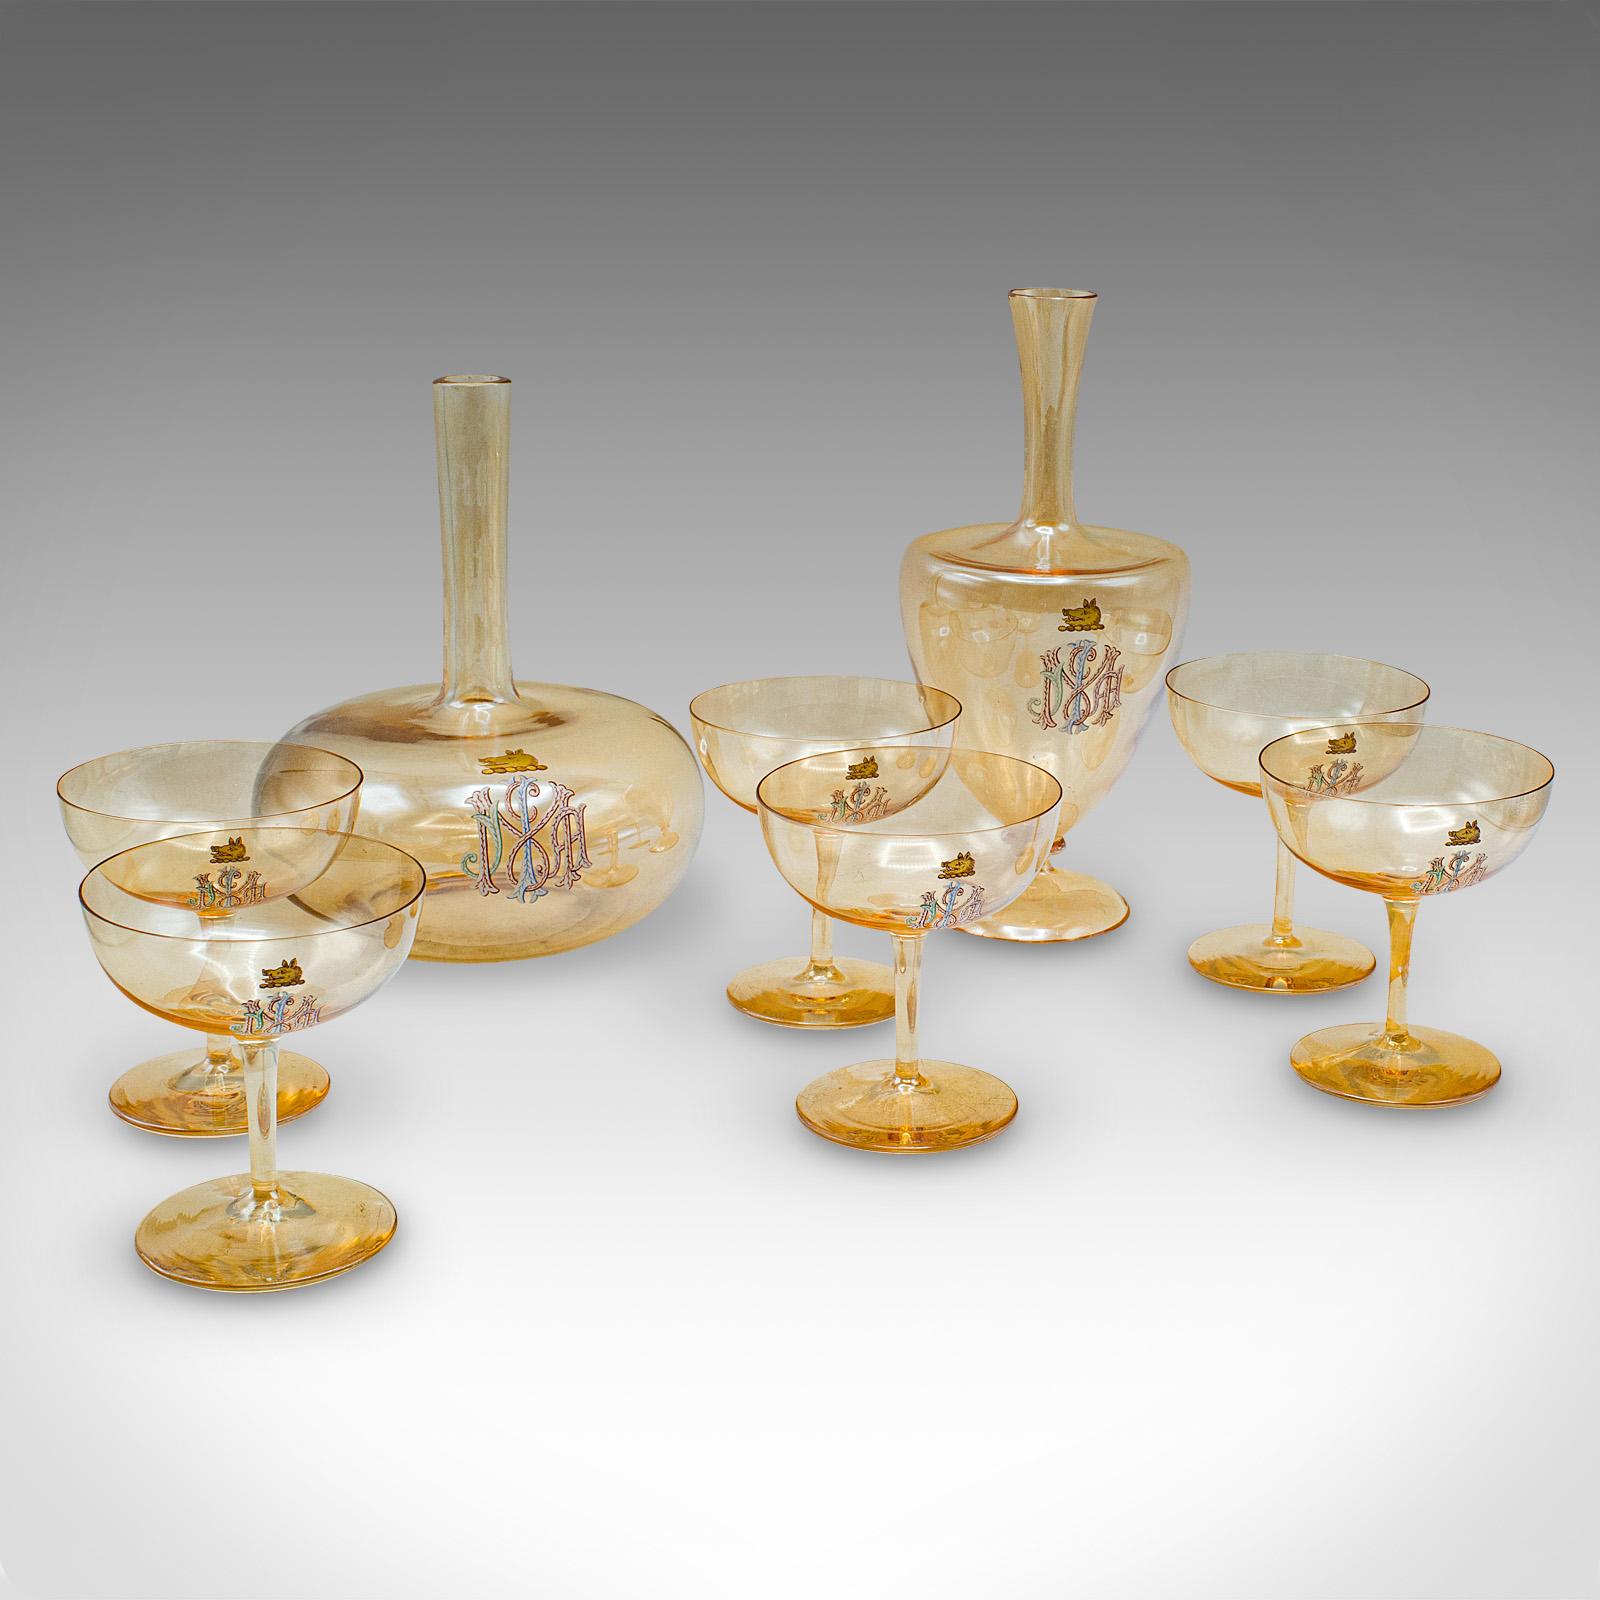 This is an antique summer garden party service. An Austrian, glass tableware set, dating to the late Victorian period, circa 1900.

Striking and comprehensive set, perfect for outdoor gatherings under pleasant skies
Displaying a desirable aged